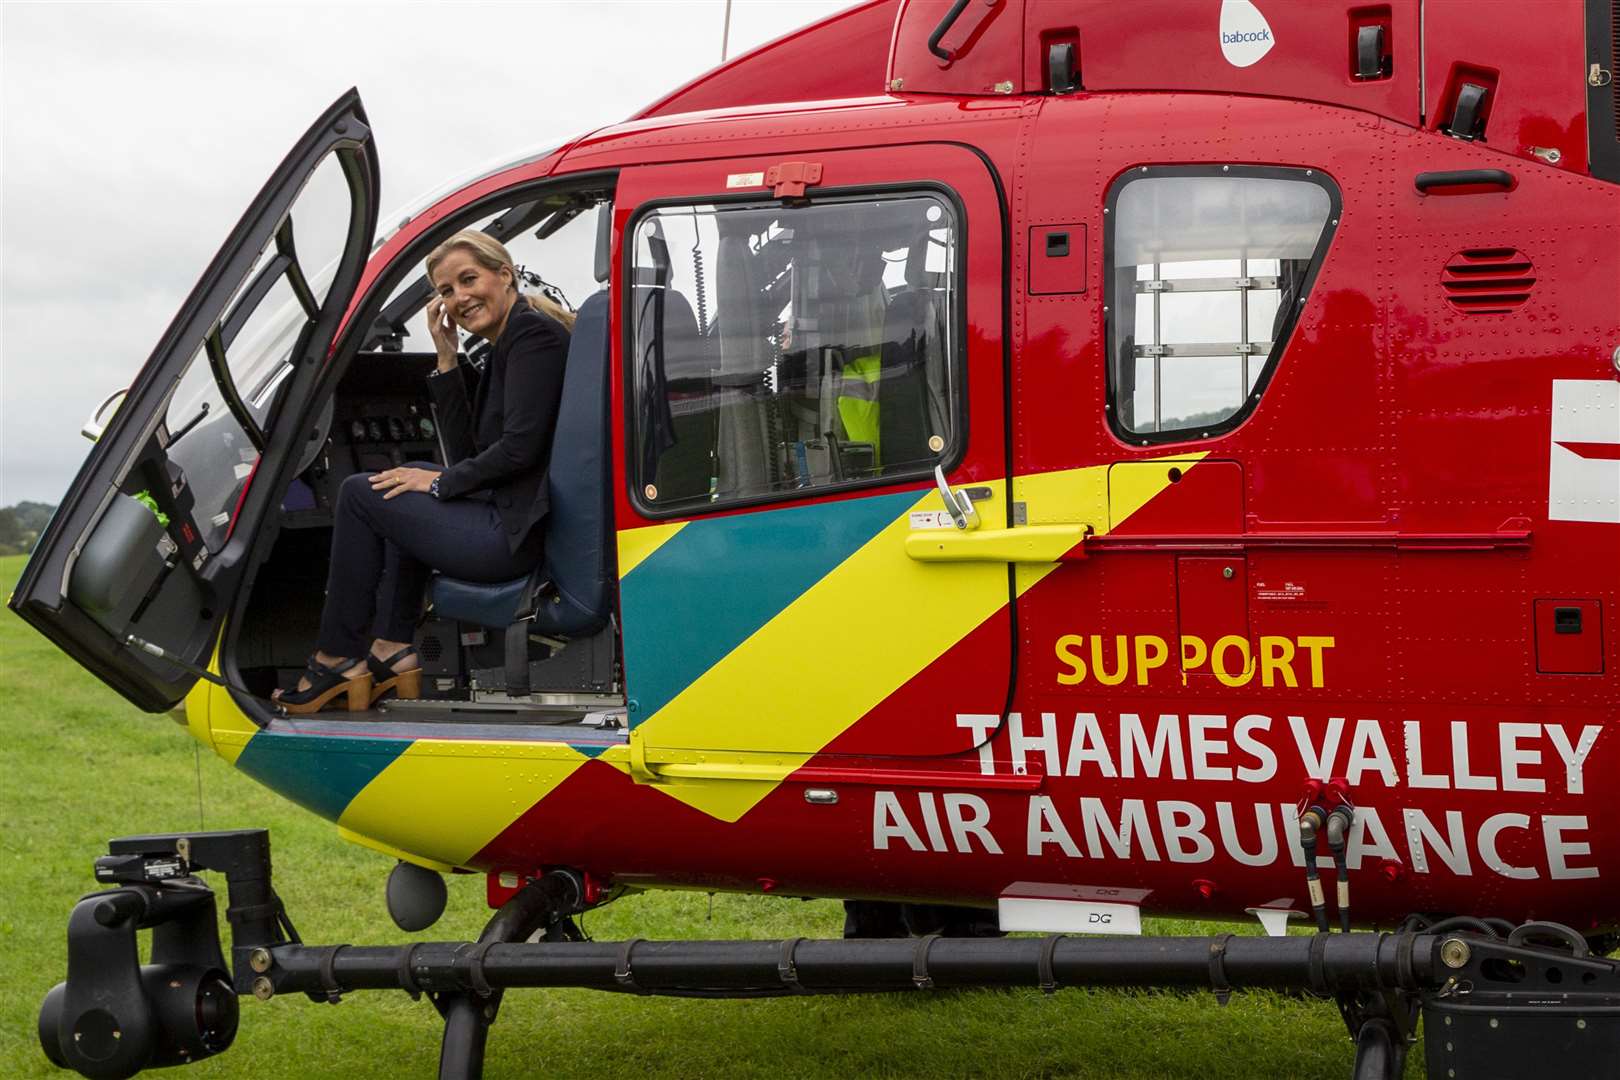 The countess climbed into an EC135 helicopter (Heathcliff O’Malley/Daily Telegraph/PA)